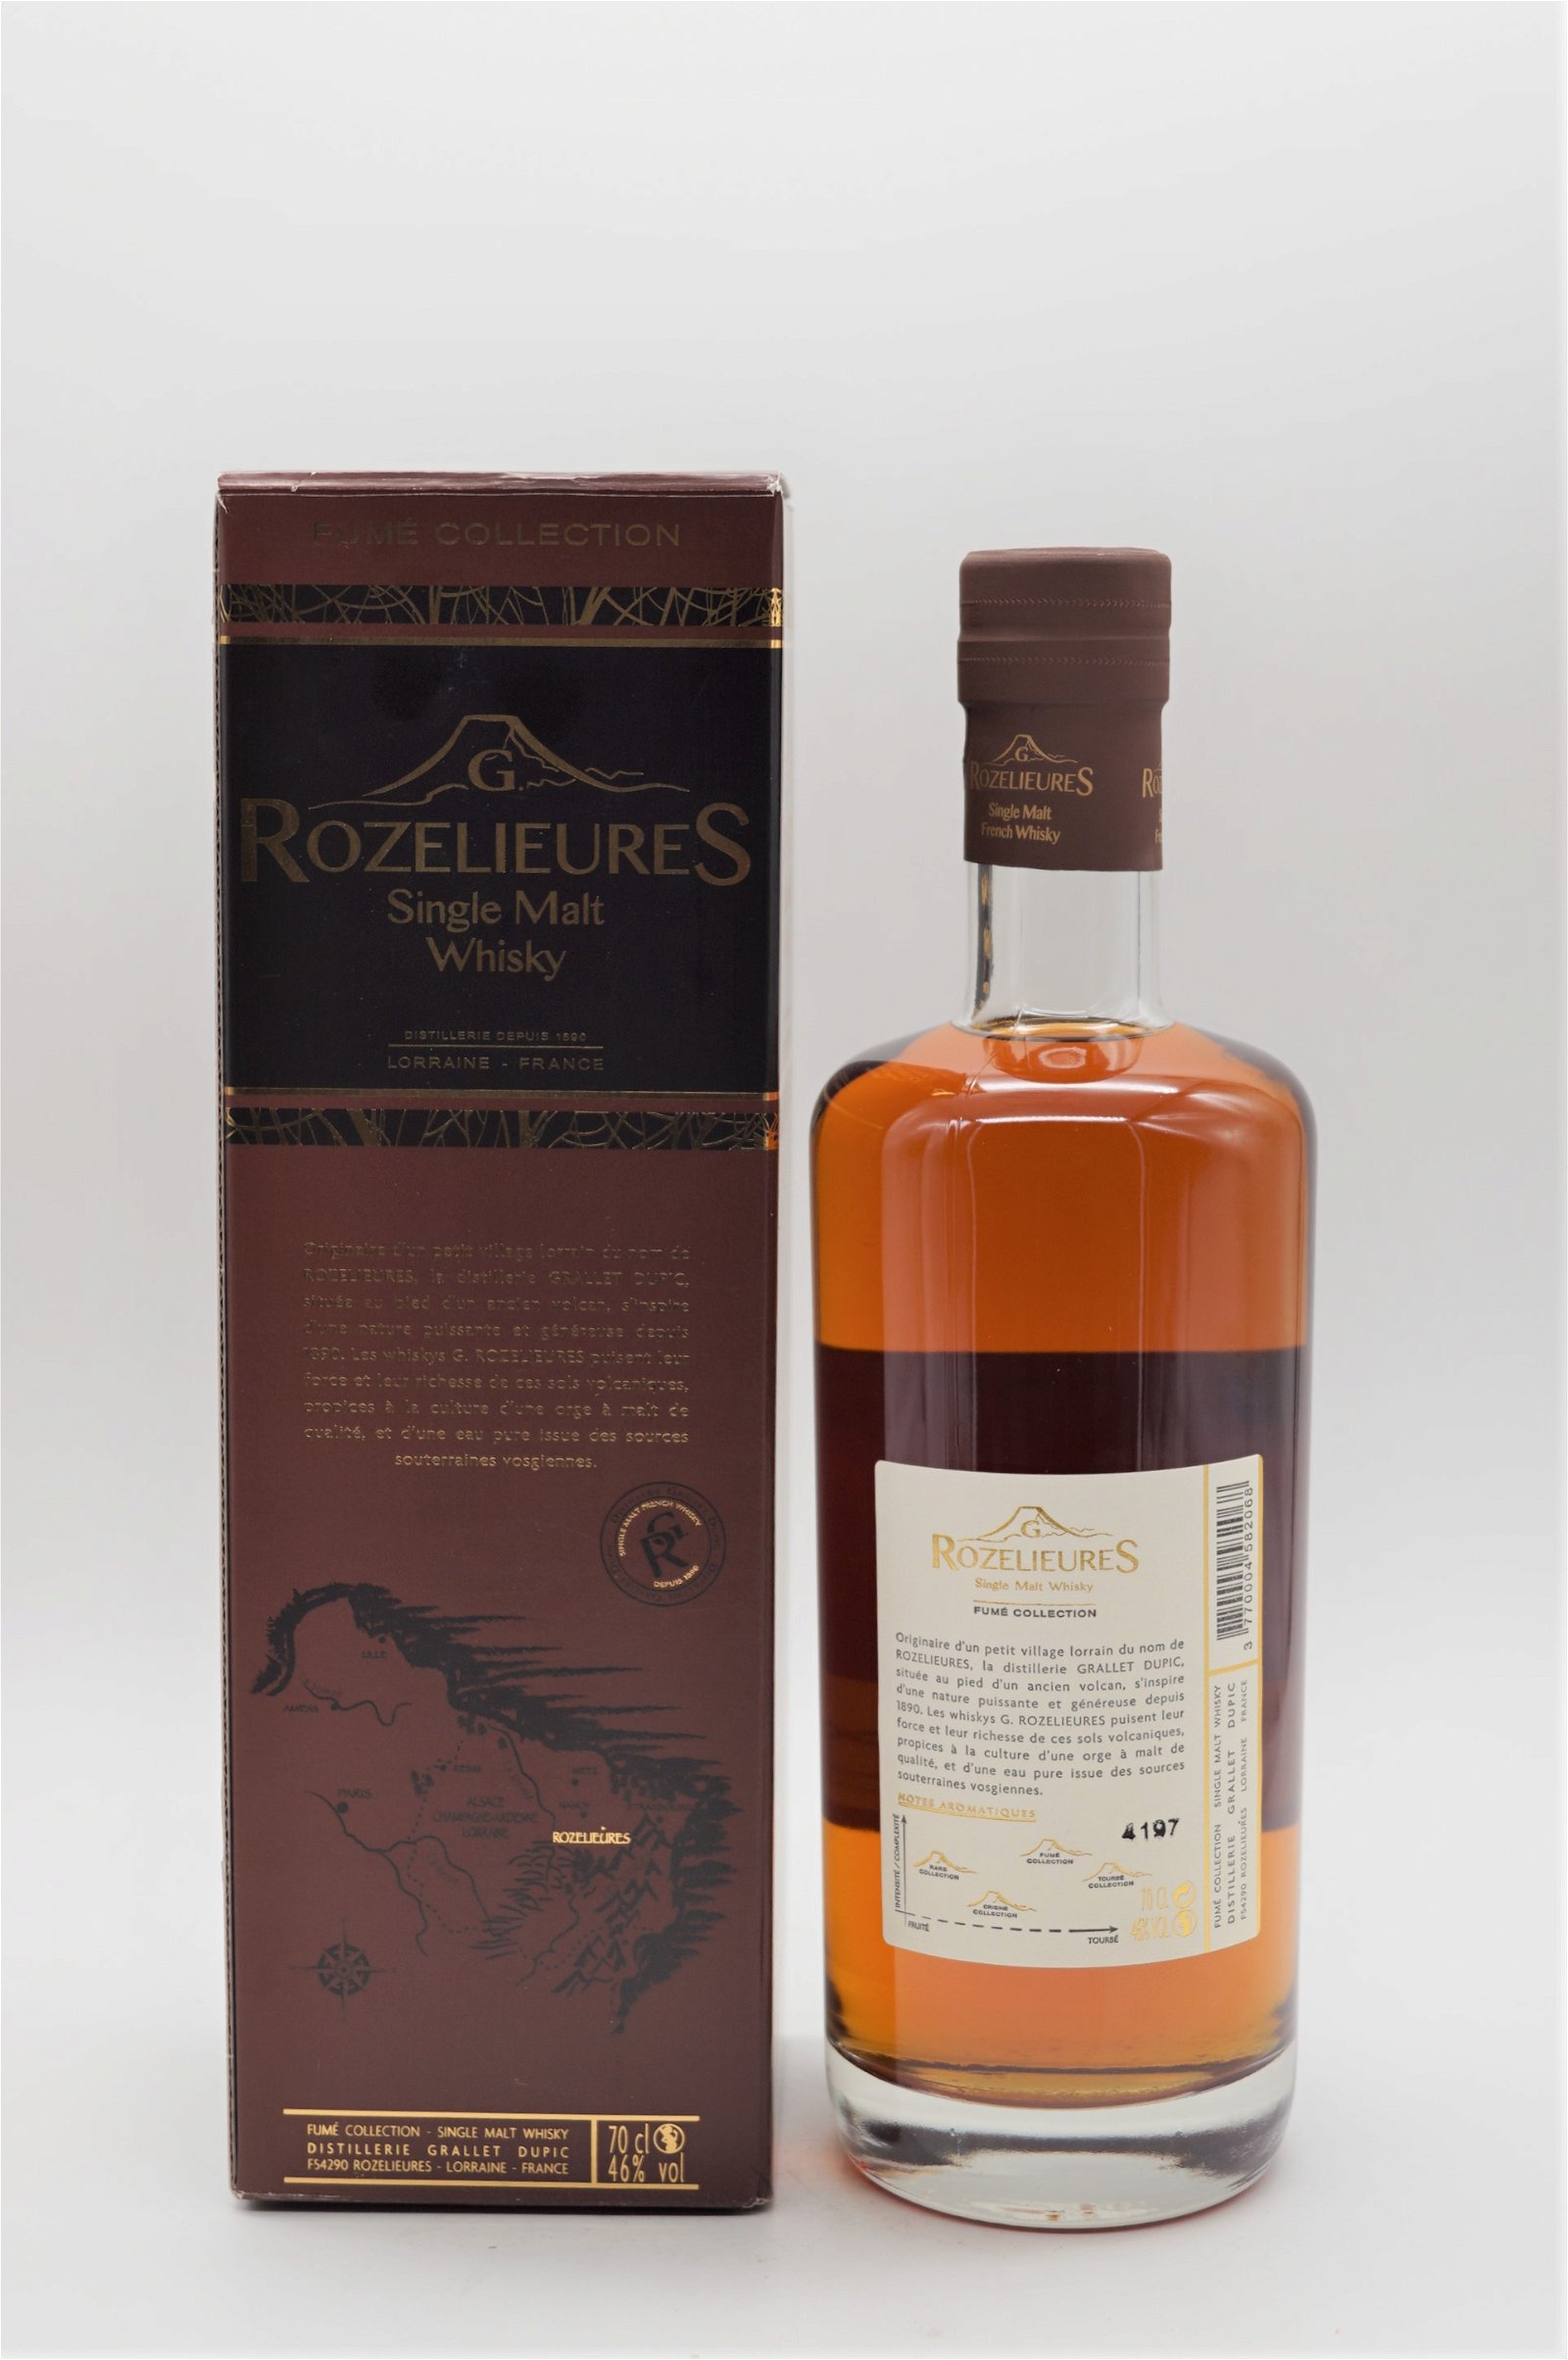 G. Rozelieures Fume Collection Single Malt Whisky 